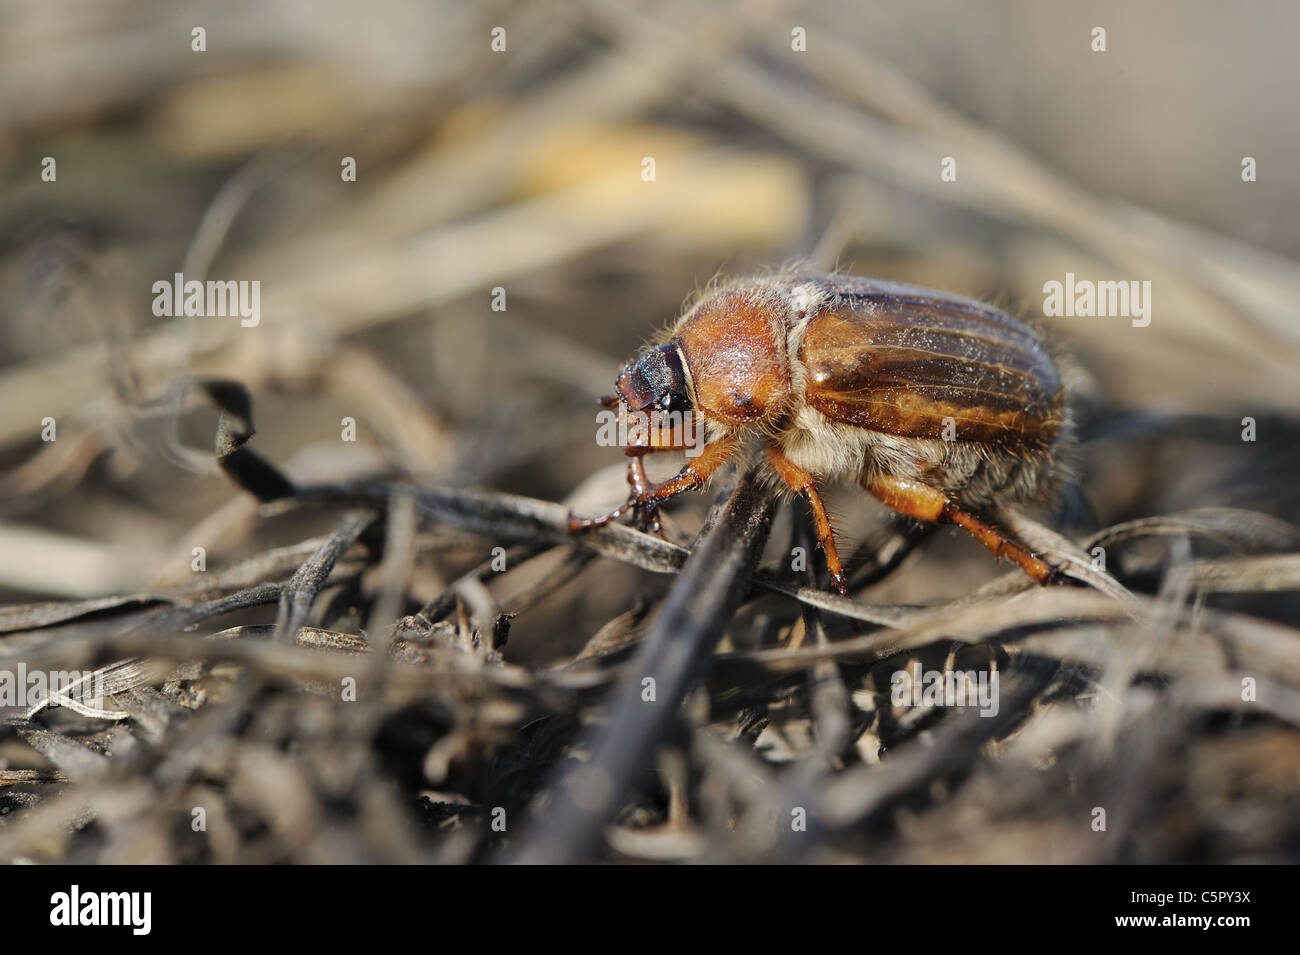 European June beetle - Summer chafer (Amphimallon solstitialis - Rhizotrogus solstitiale) moving on the ground at spring Stock Photo